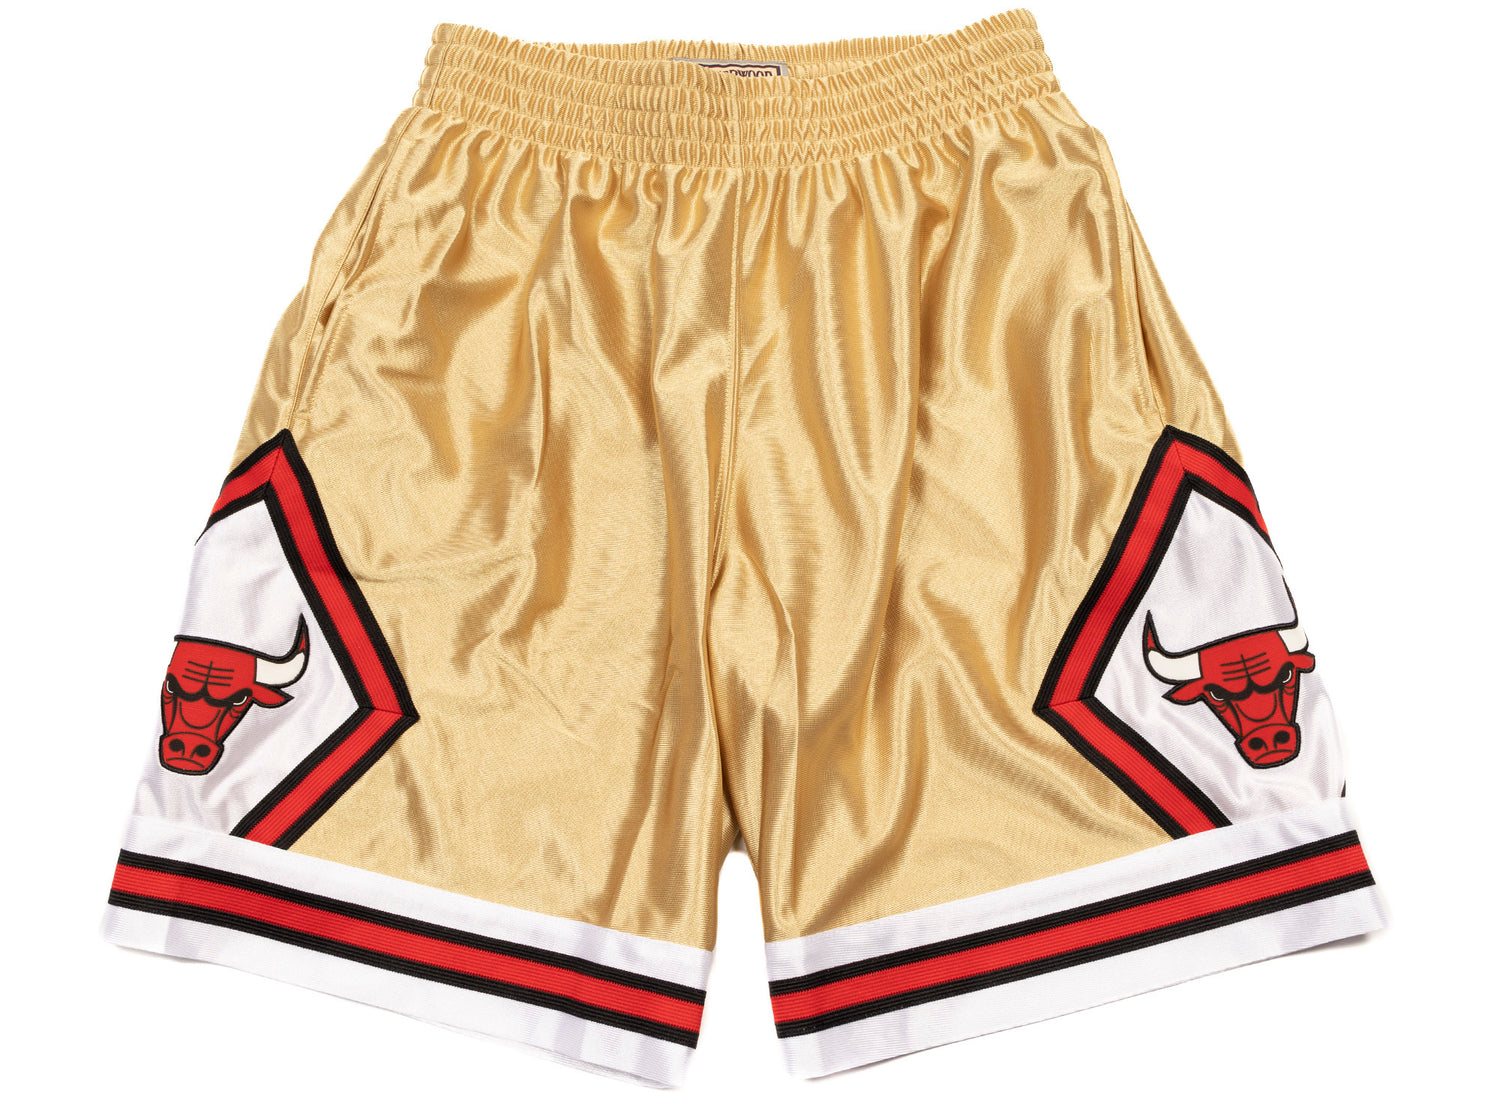 Mitchell & Ness Men's Shorts - Red - XL